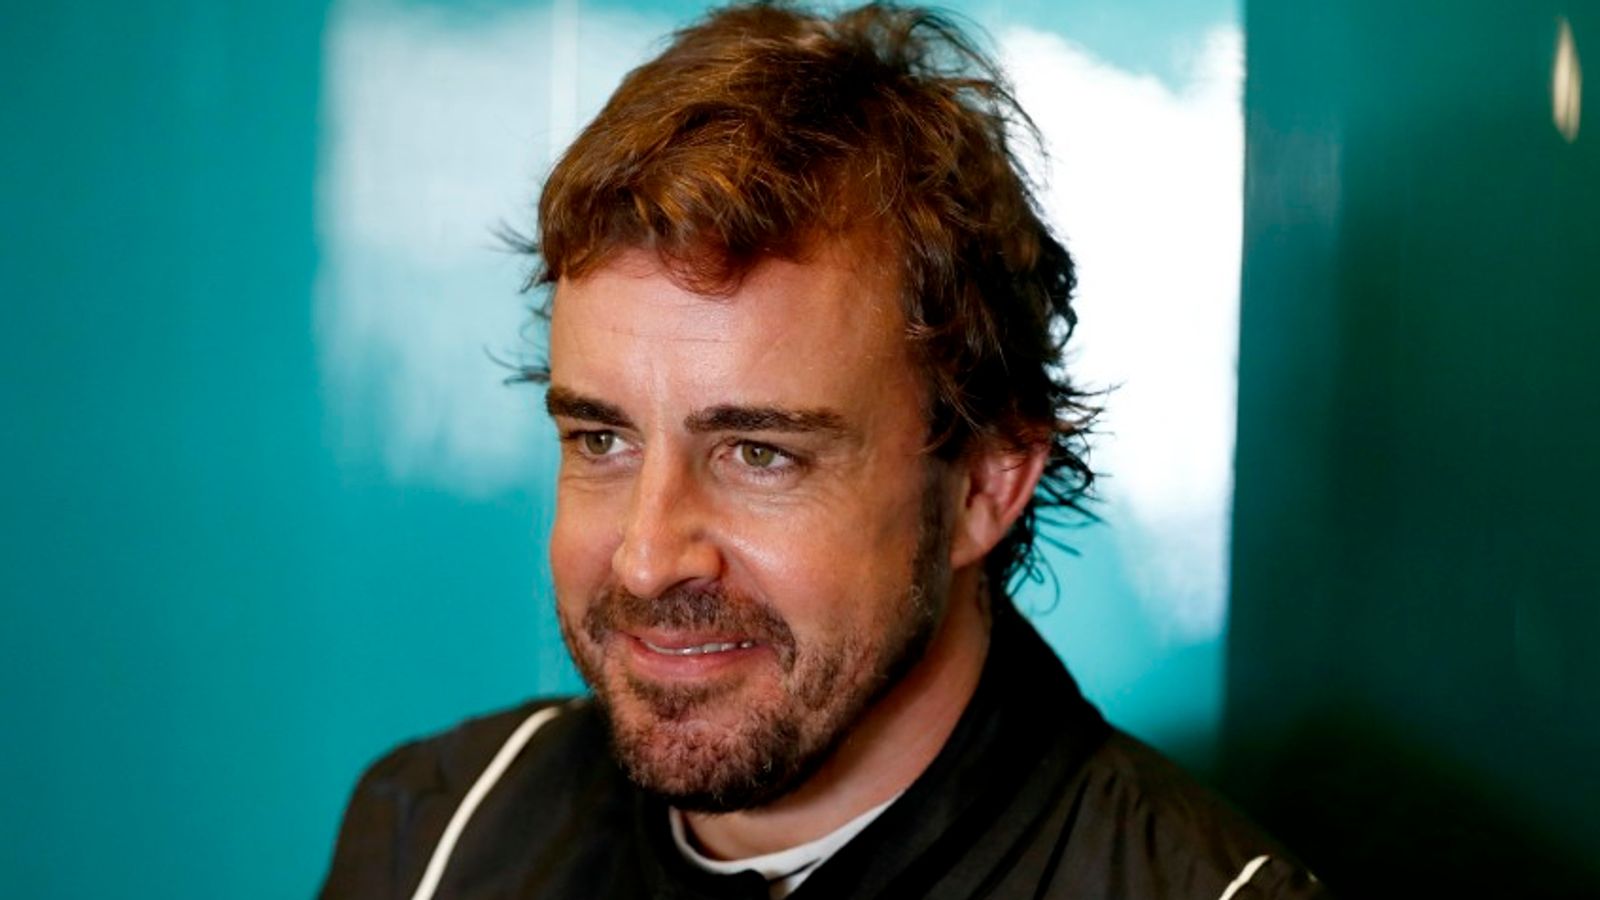 Fernando Alonso feedback to Aston Martin key in radical changes to 2023 car, says technical director Eric Blandin